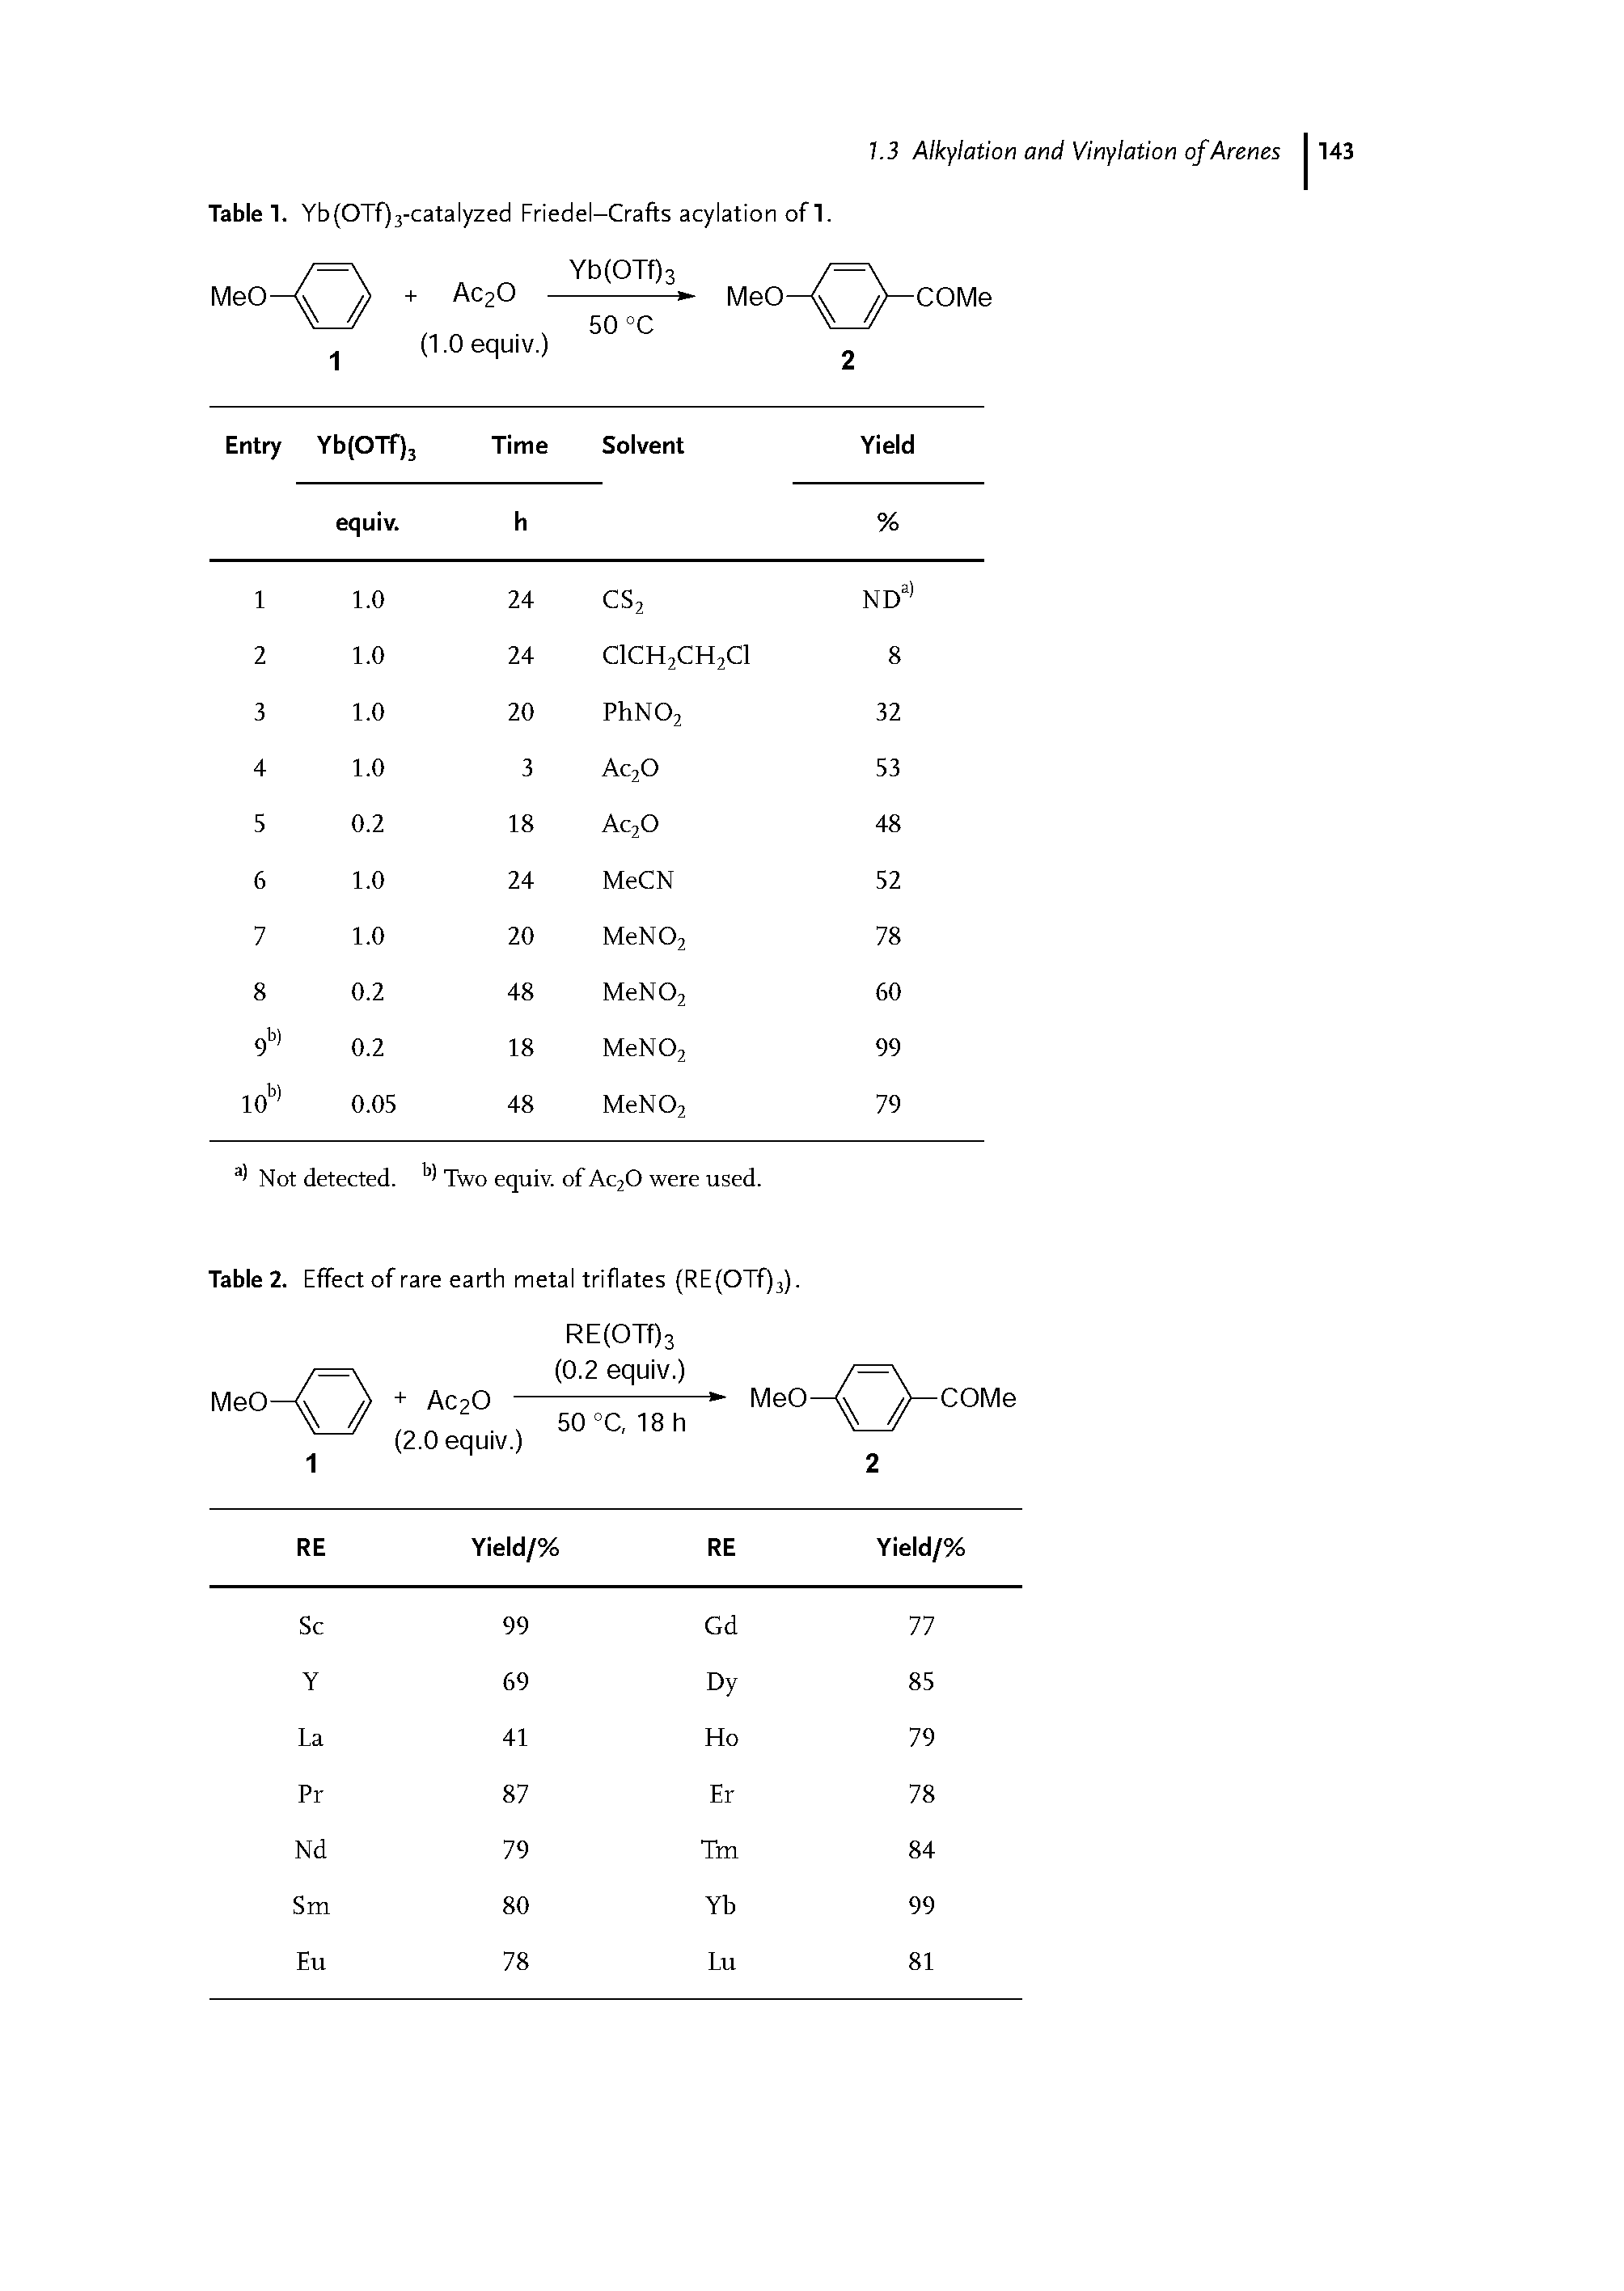 Table 2. Effect of rare earth metal triflates (RE(OTf)3).